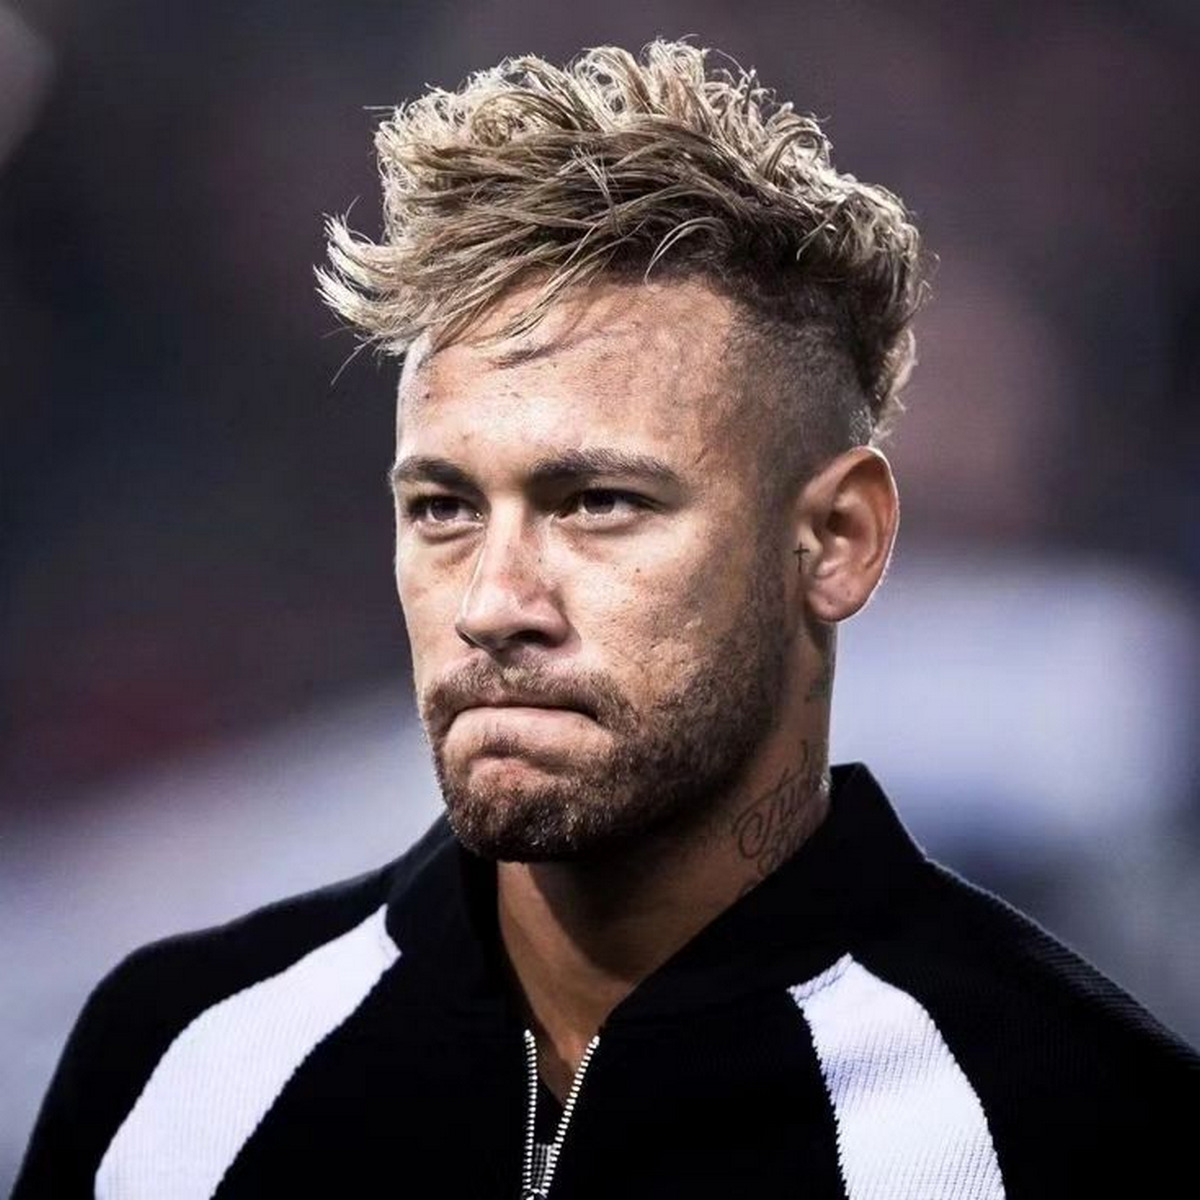 FIFA World Cup 2018 - Brazil: More hairstyles than goals as Neymar fails to  rule in Russia | MARCA in English